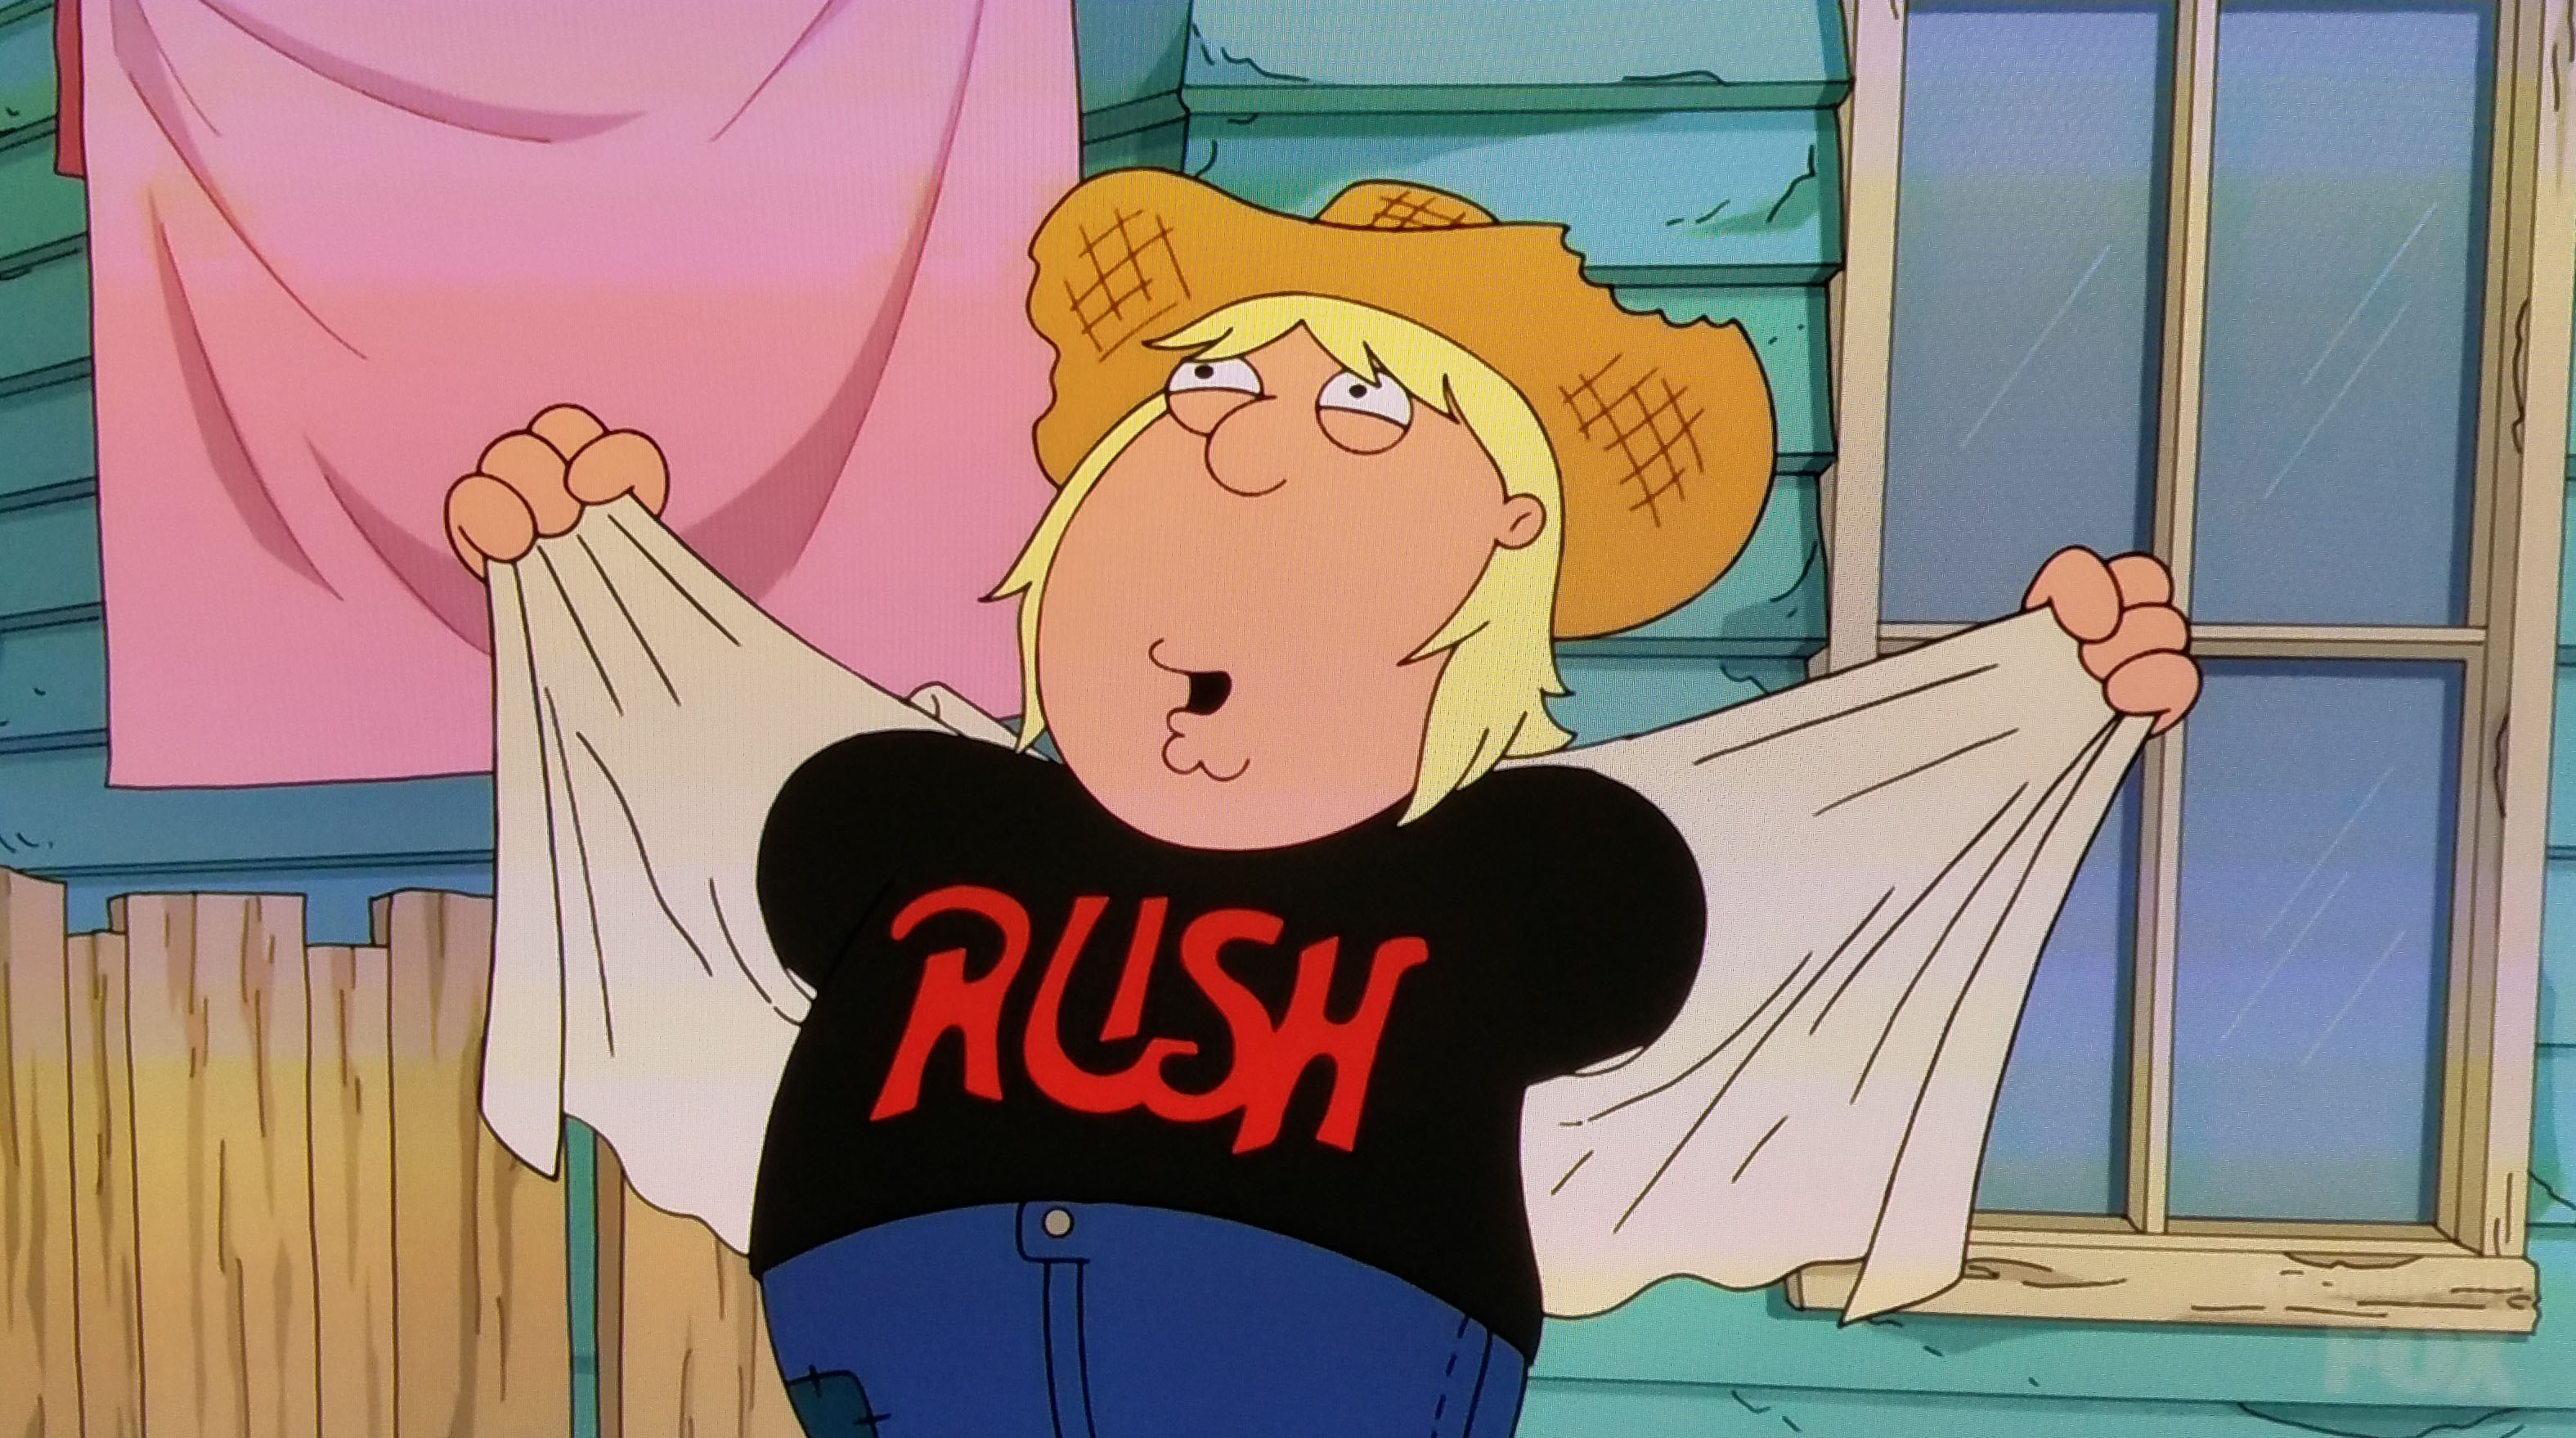 Rush Reference on Family Guy - Video and Screen Caps Now Online